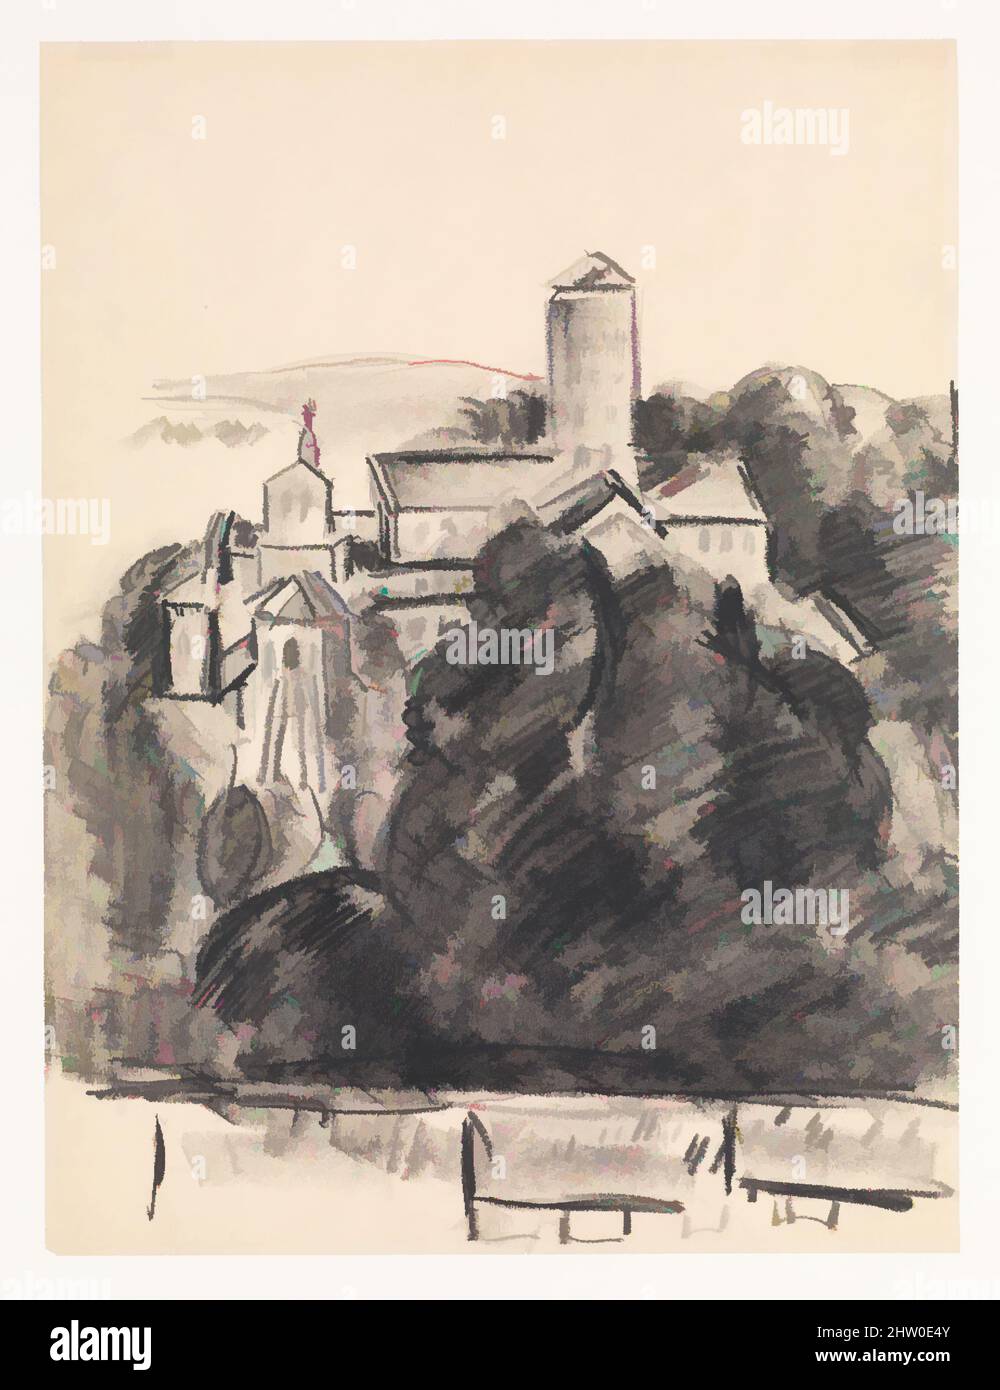 Art inspired by The Cloisters, ca. 1940, Crayon on paper, 16 x 12 1/4 in. (40.6 x 31.1 cm), Drawings, Marsden Hartley (American, Lewiston, Maine 1877–1943 Ellsworth, Maine, Classic works modernized by Artotop with a splash of modernity. Shapes, color and value, eye-catching visual impact on art. Emotions through freedom of artworks in a contemporary way. A timeless message pursuing a wildly creative new direction. Artists turning to the digital medium and creating the Artotop NFT Stock Photo